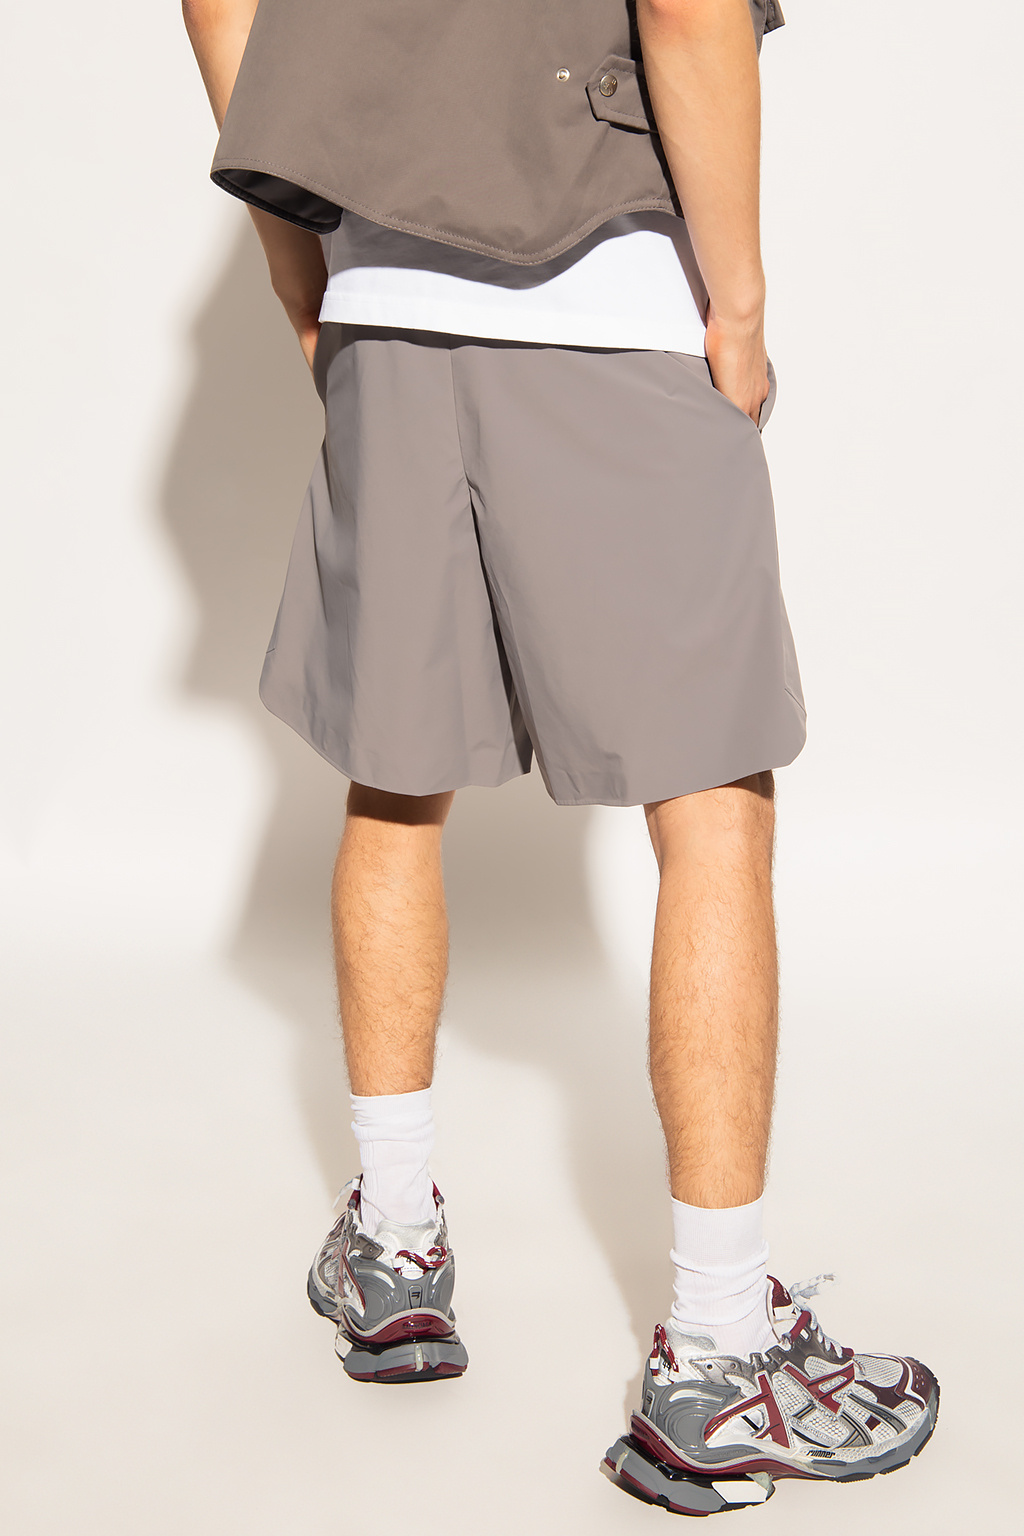 A-COLD-WALL* Shorts with pockets | Men's Clothing | Vitkac